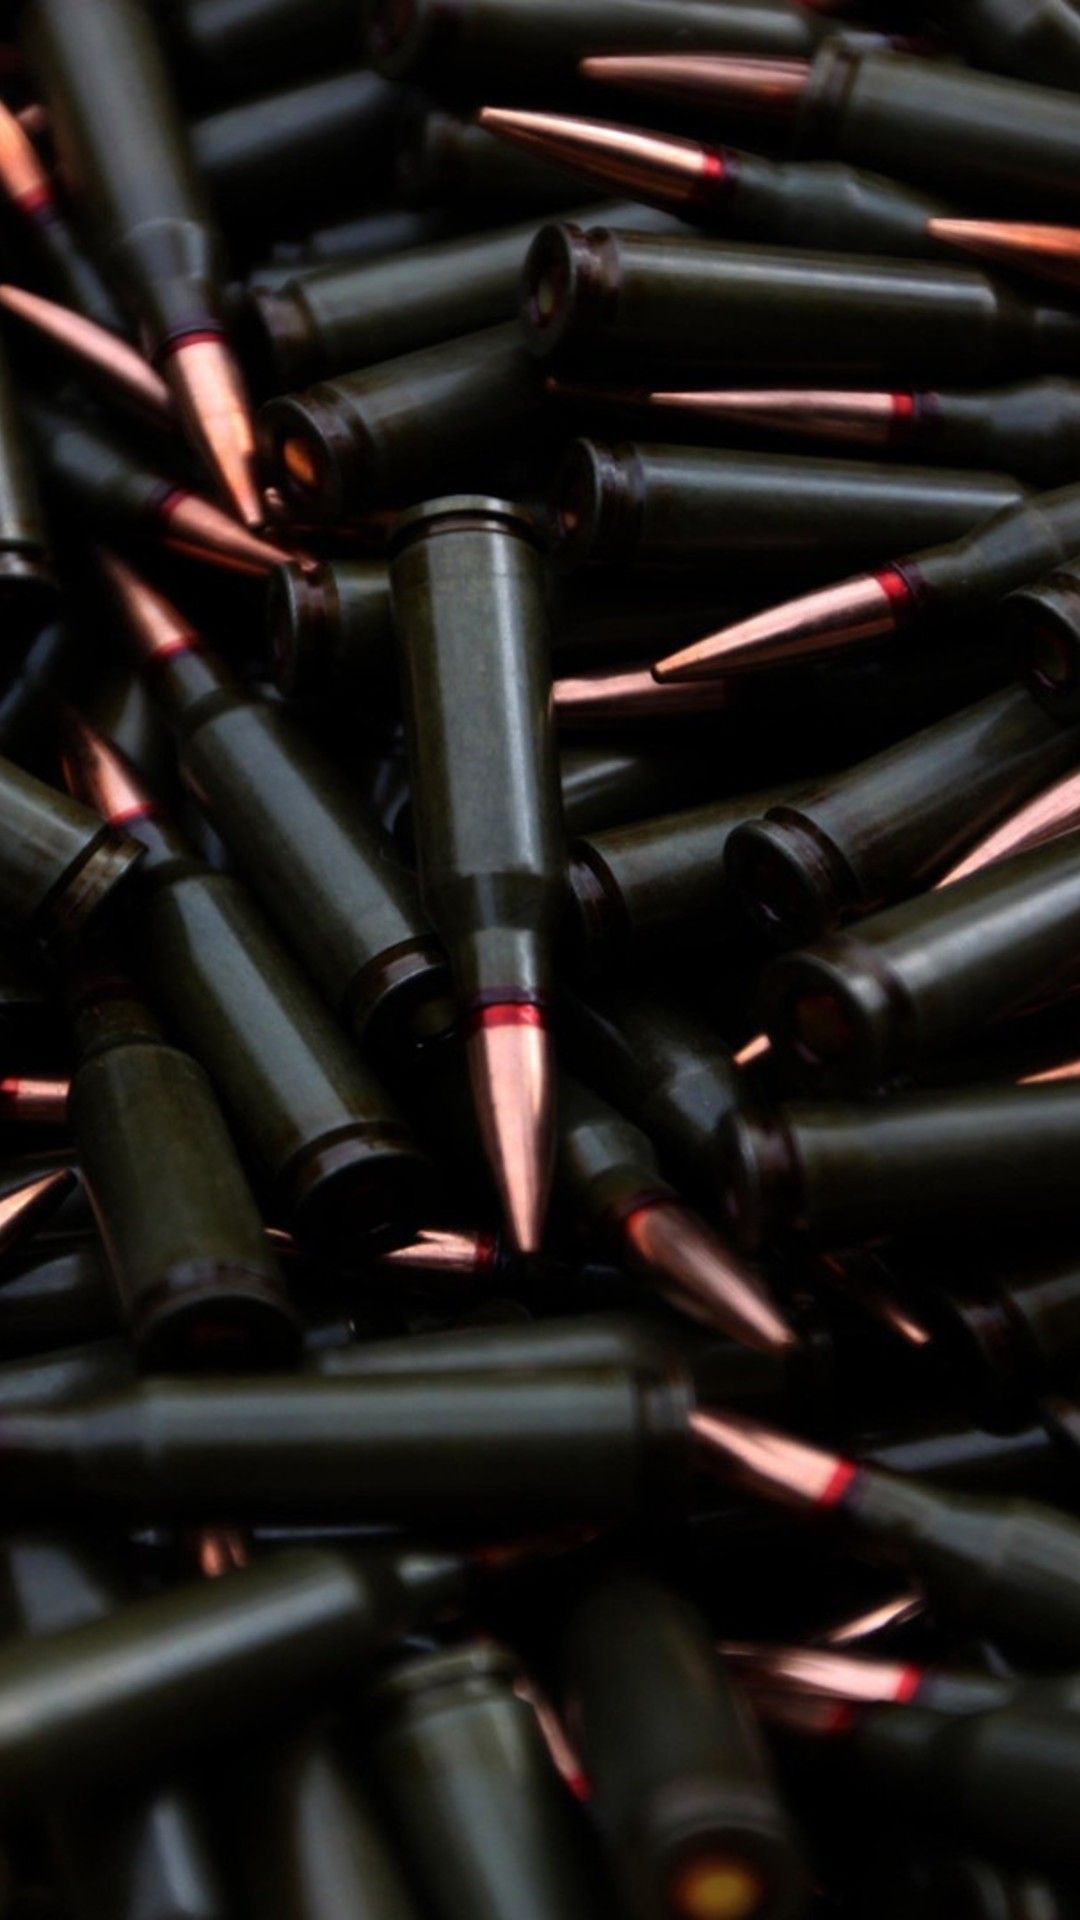 black-ammo-with-pink-bullet-1080x1920.jpg